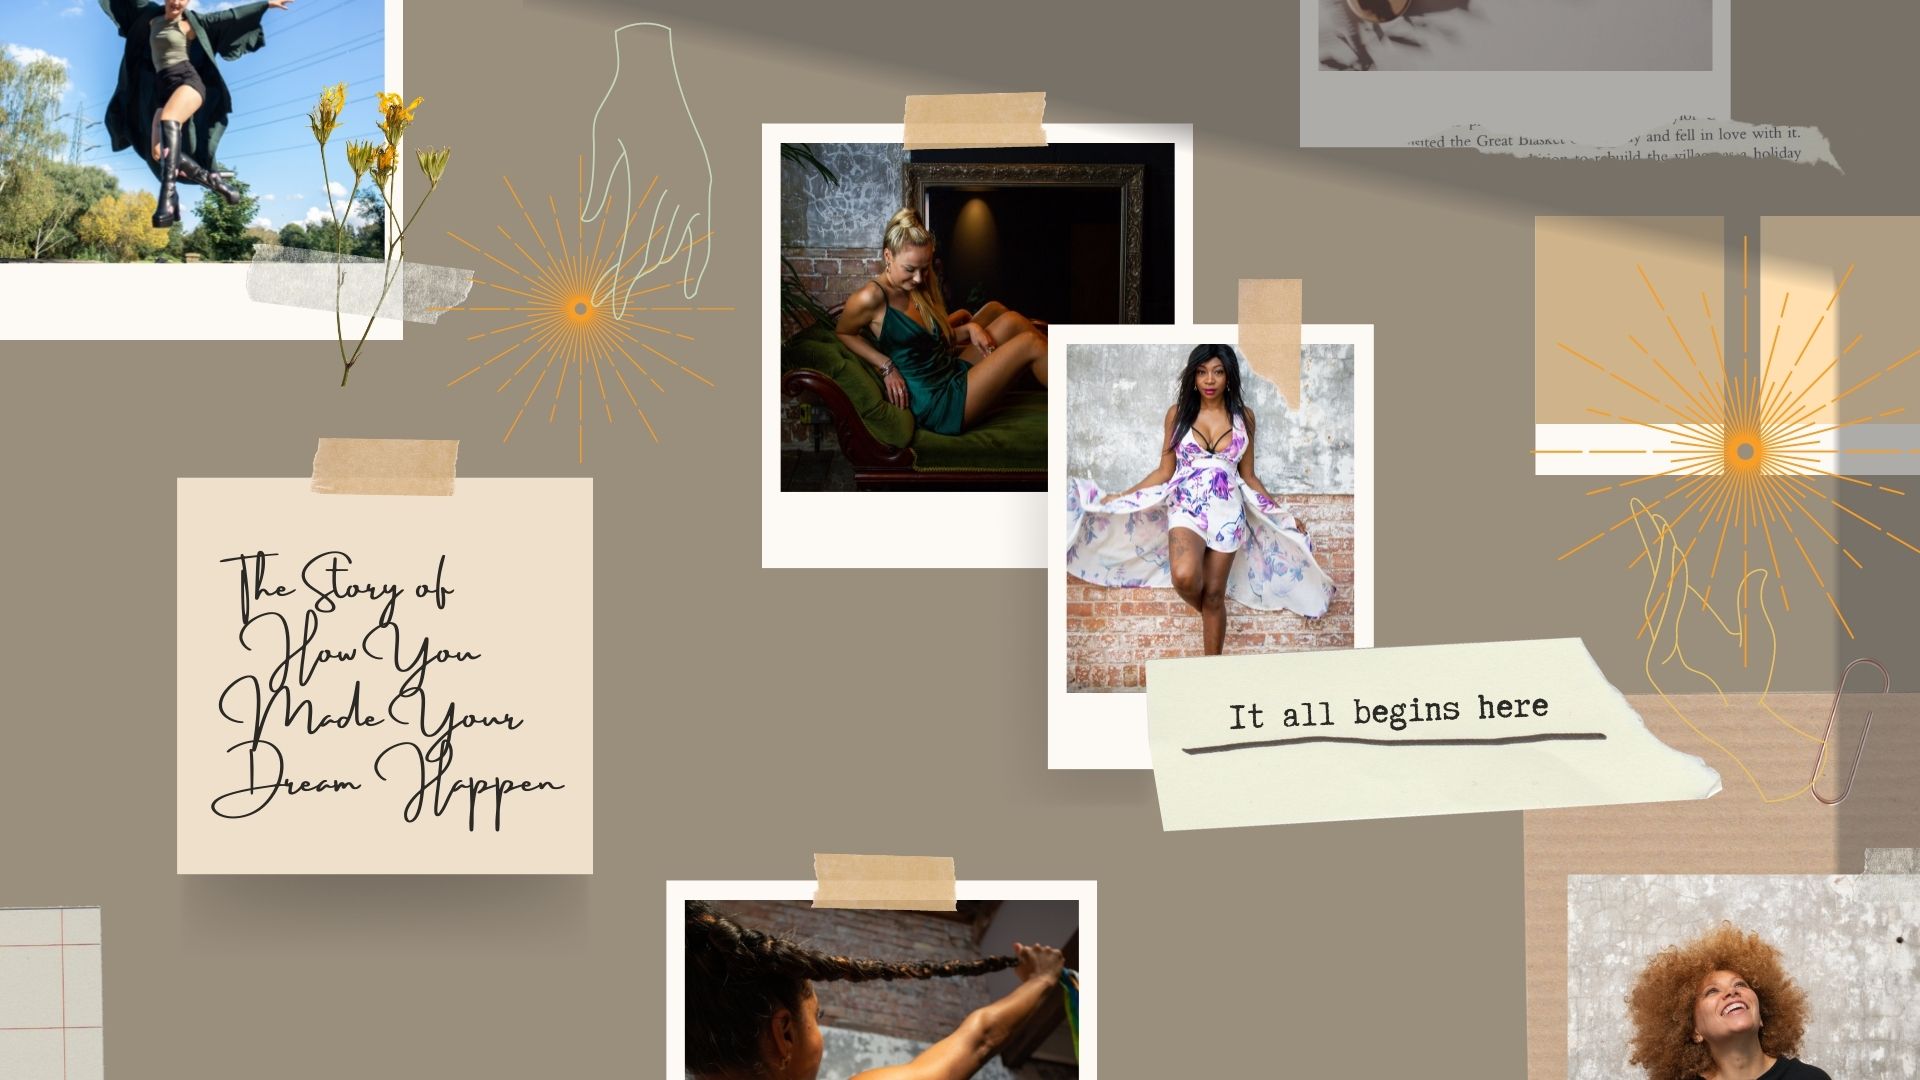 Self Care School Header Image made up of a display board of polaroid photos of lots of different humans and the words "It All Begins here" and "The story off How You Made Your Dream Happen"